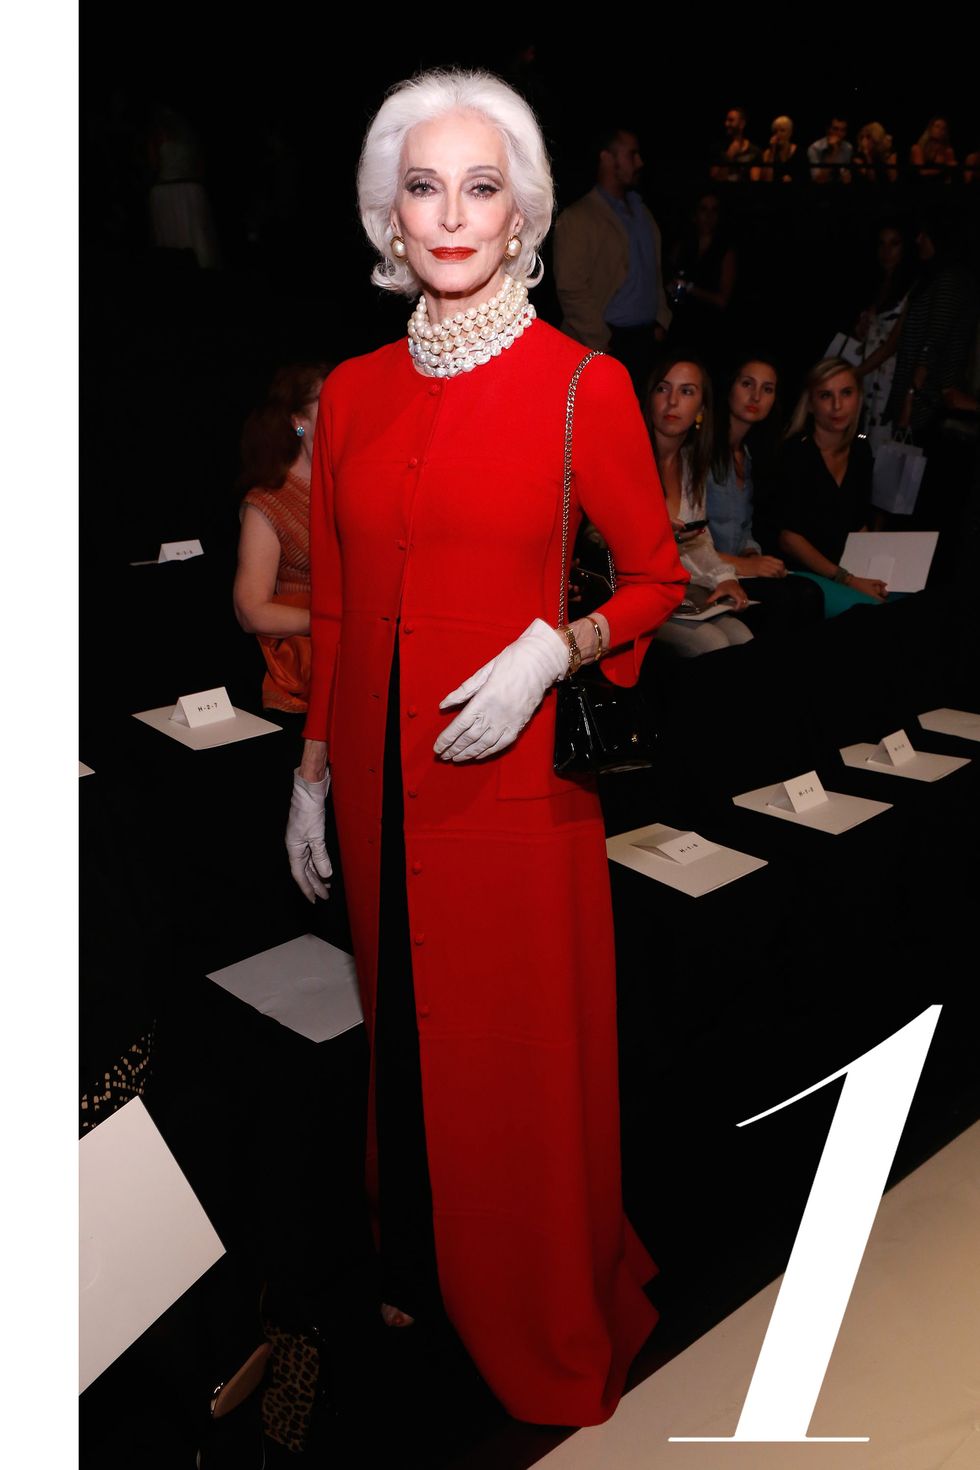 NEW YORK, NY - SEPTEMBER 09:  Carmen Dell'Orefice attends the Chado Ralph Rucci Spring 2013 fashion show during Mercedes-Benz Fashion Week  at The Theatre Lincoln Center on September 9, 2012 in New York City.  (Photo by Cindy Ord/Getty Images for Mercedes-Benz Fashion Week)